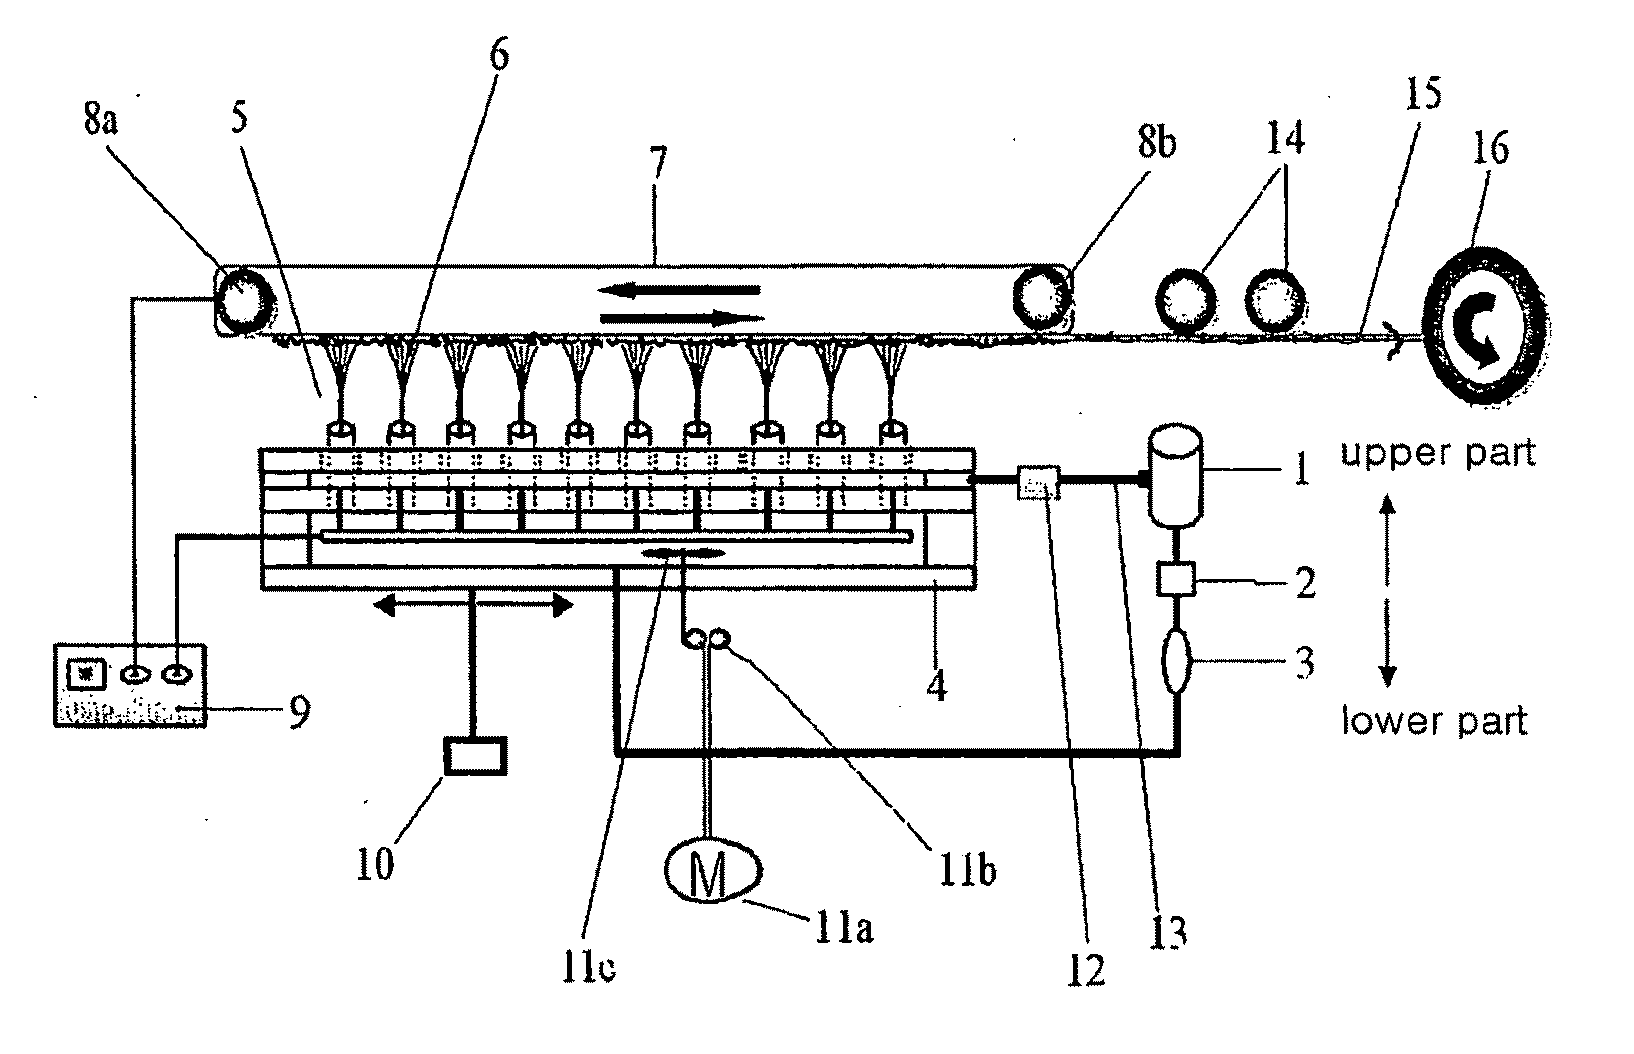 Bottom-up electrospinning devices, and nanofibers prepared by using the same